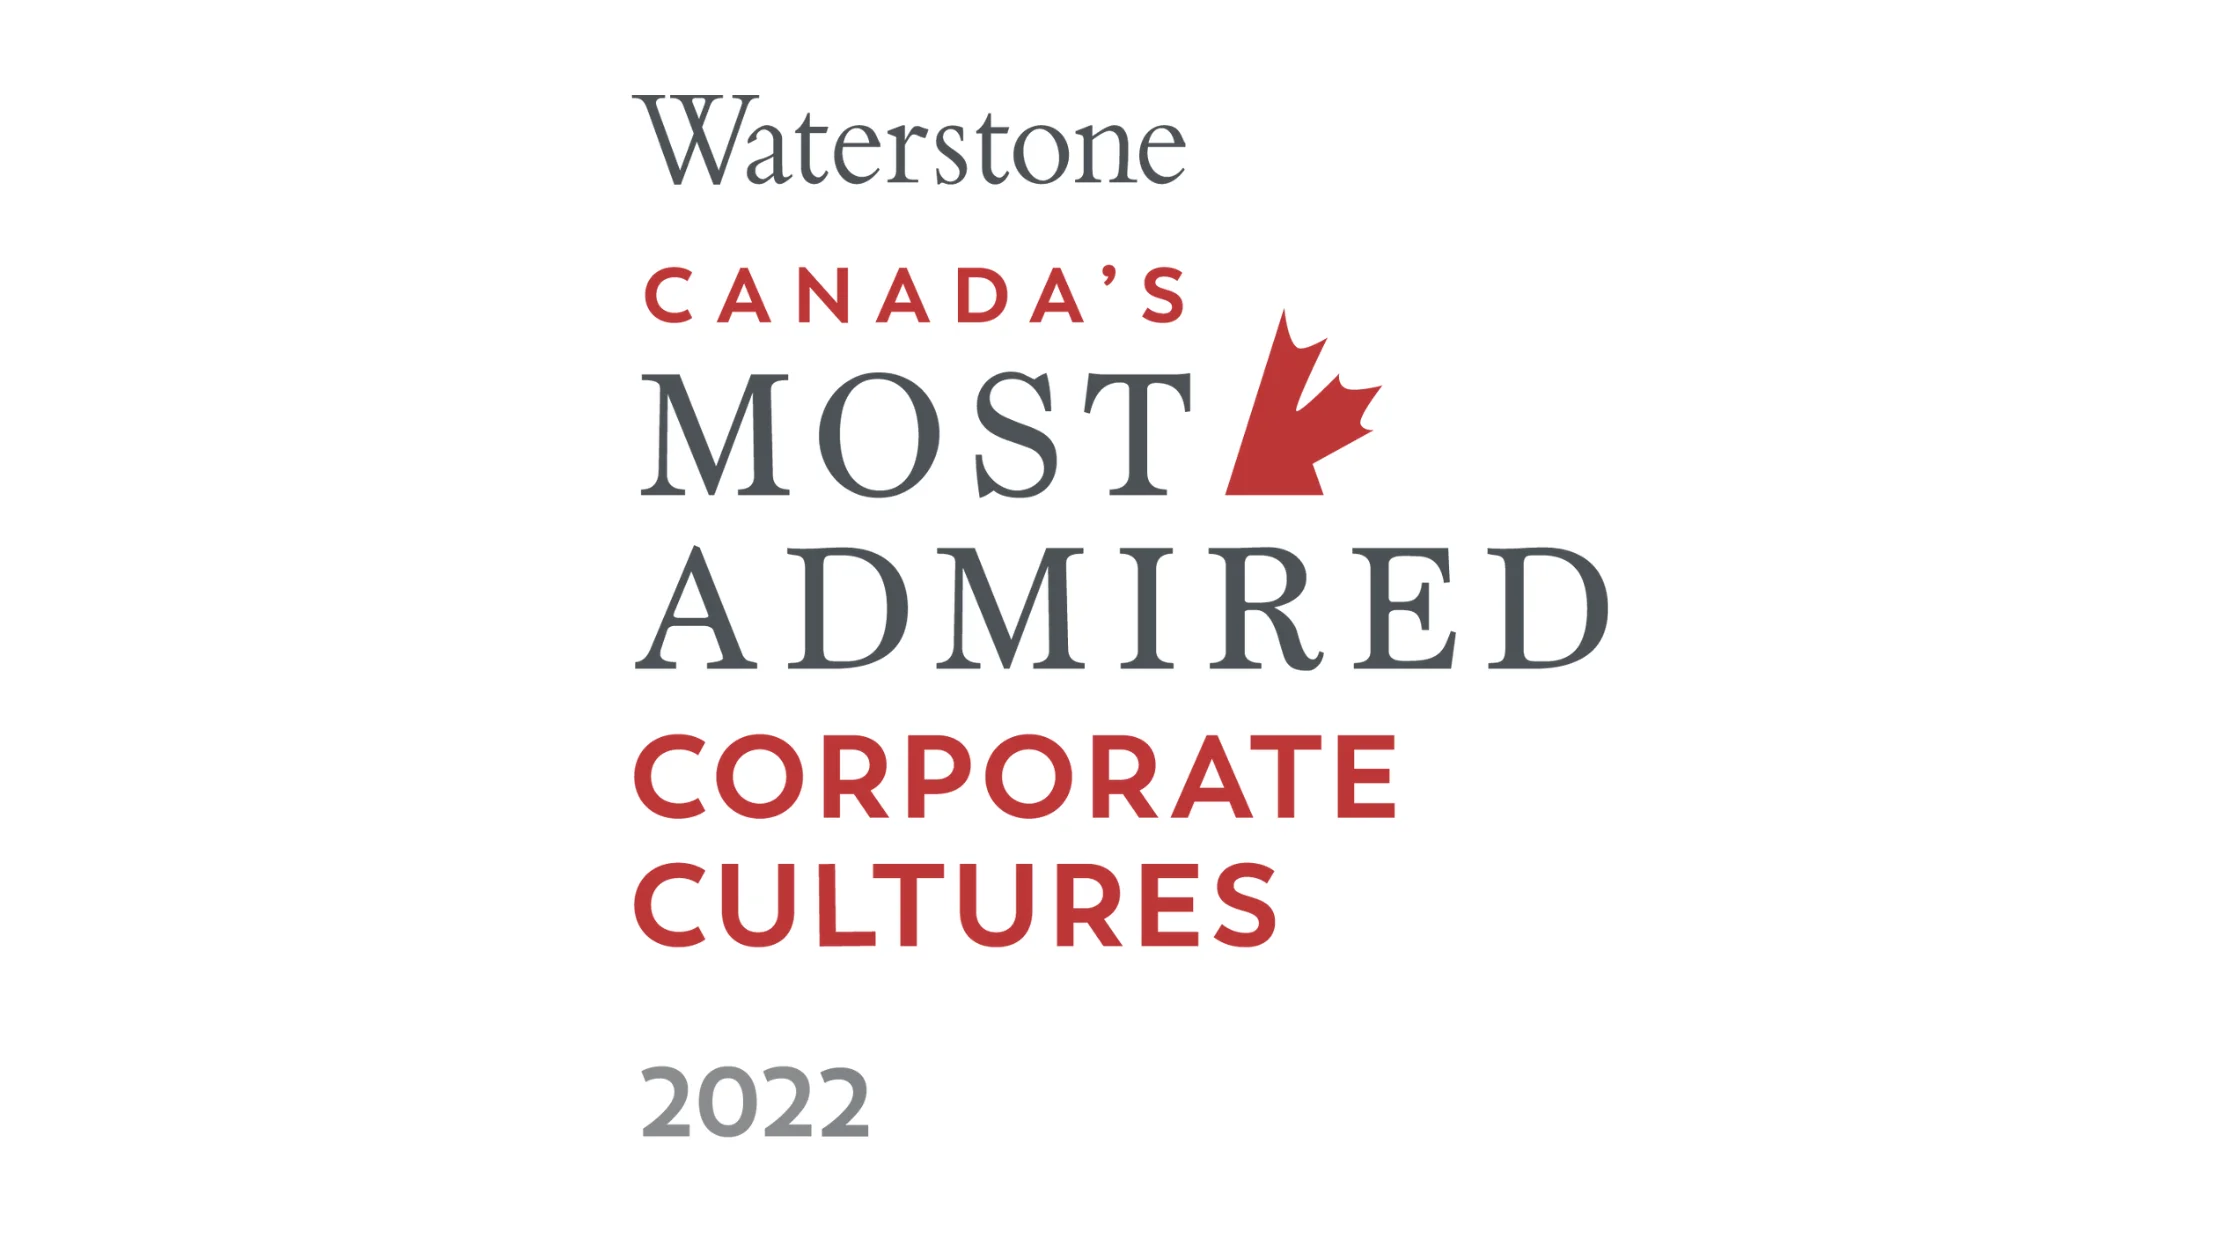 Waterstone Canada's Most Admired Corporate Cultures